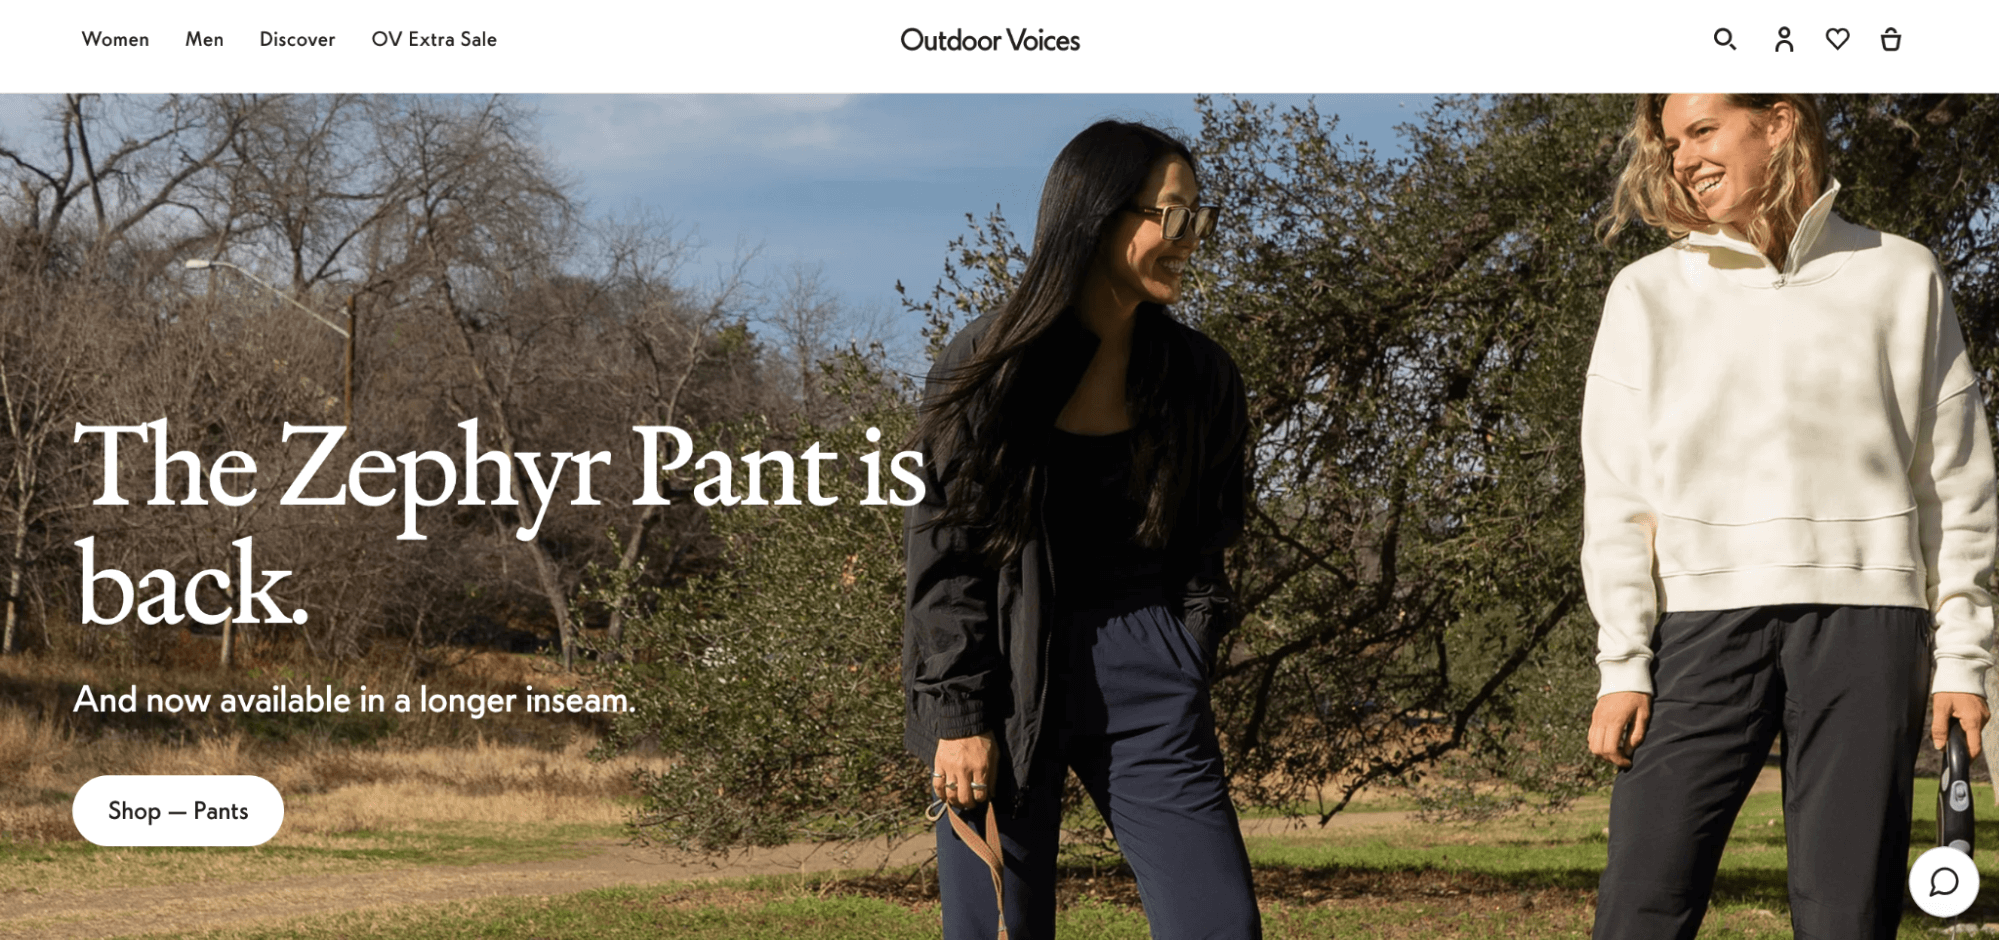 The image displays the homepage of Outdoor Voices stating they have Zephyr Pants back in stock with an image of two women walking outside on a cool afternoon.
